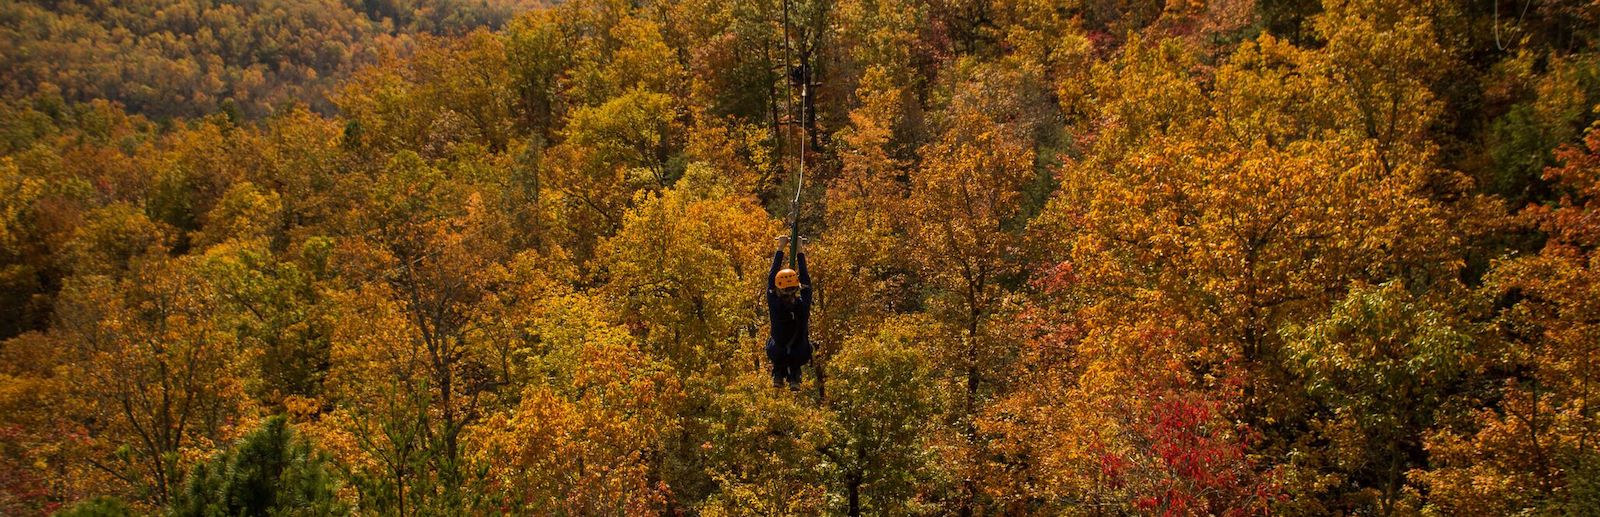 Why Our Mountaintop Zipline Tour is the Best Way to Celebrate Fall in the Smoky Mountains